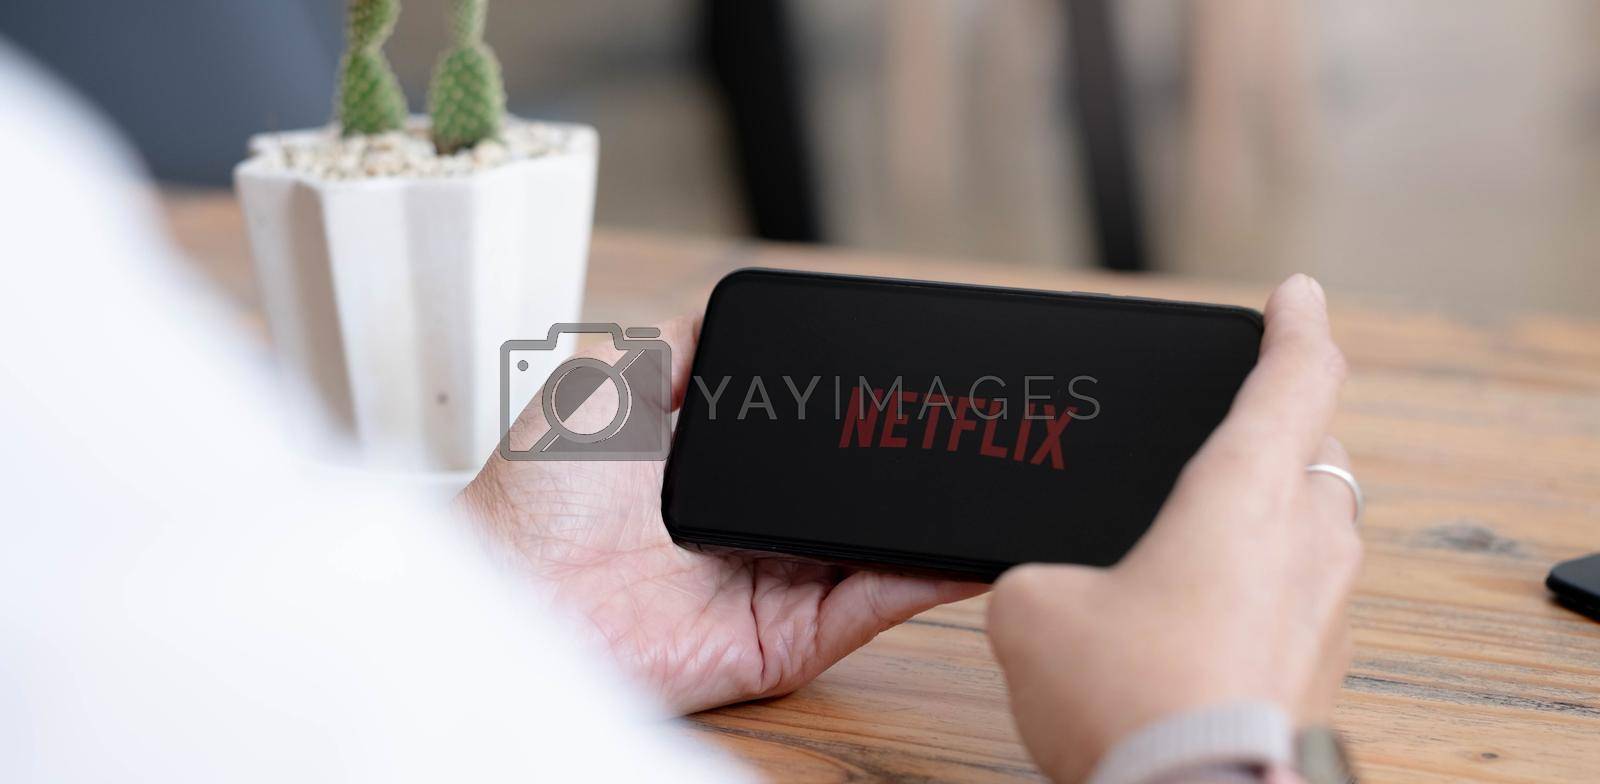 CHIANG MAI, THAILAND, AUG 2 2021 : Woman hand holding Smart Phone with Netflix logo on Apple iPhone Xs. Netflix is a global provider of streaming movies and TV series..